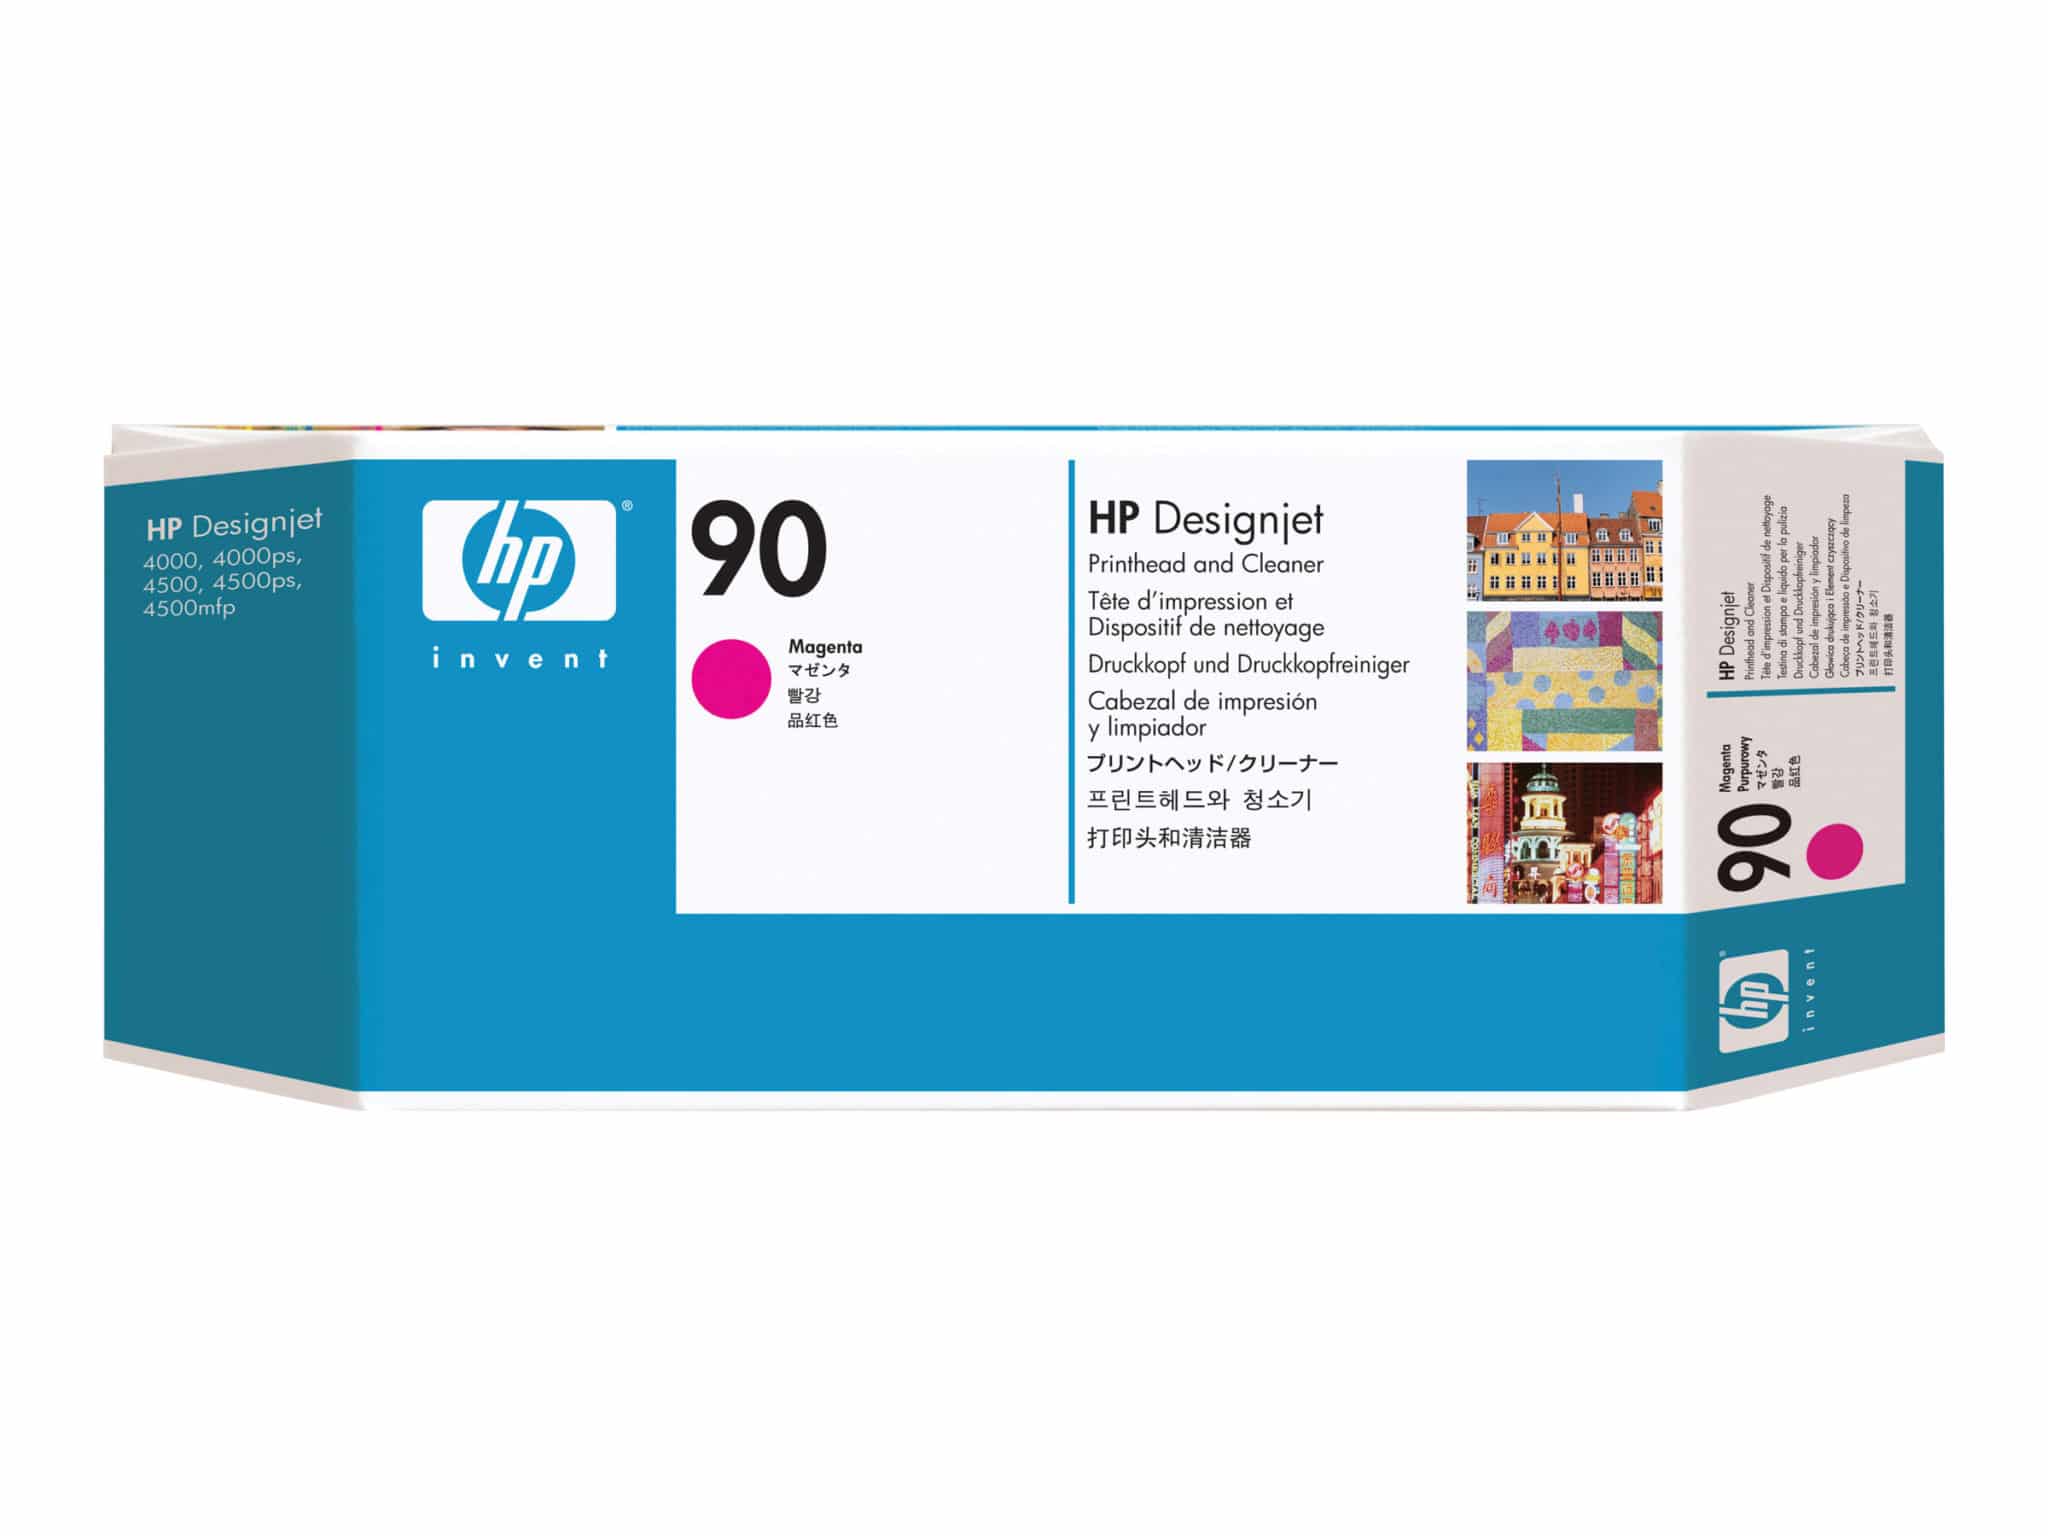 HP 90 DesignJet Magenta Printhead and Cleaner